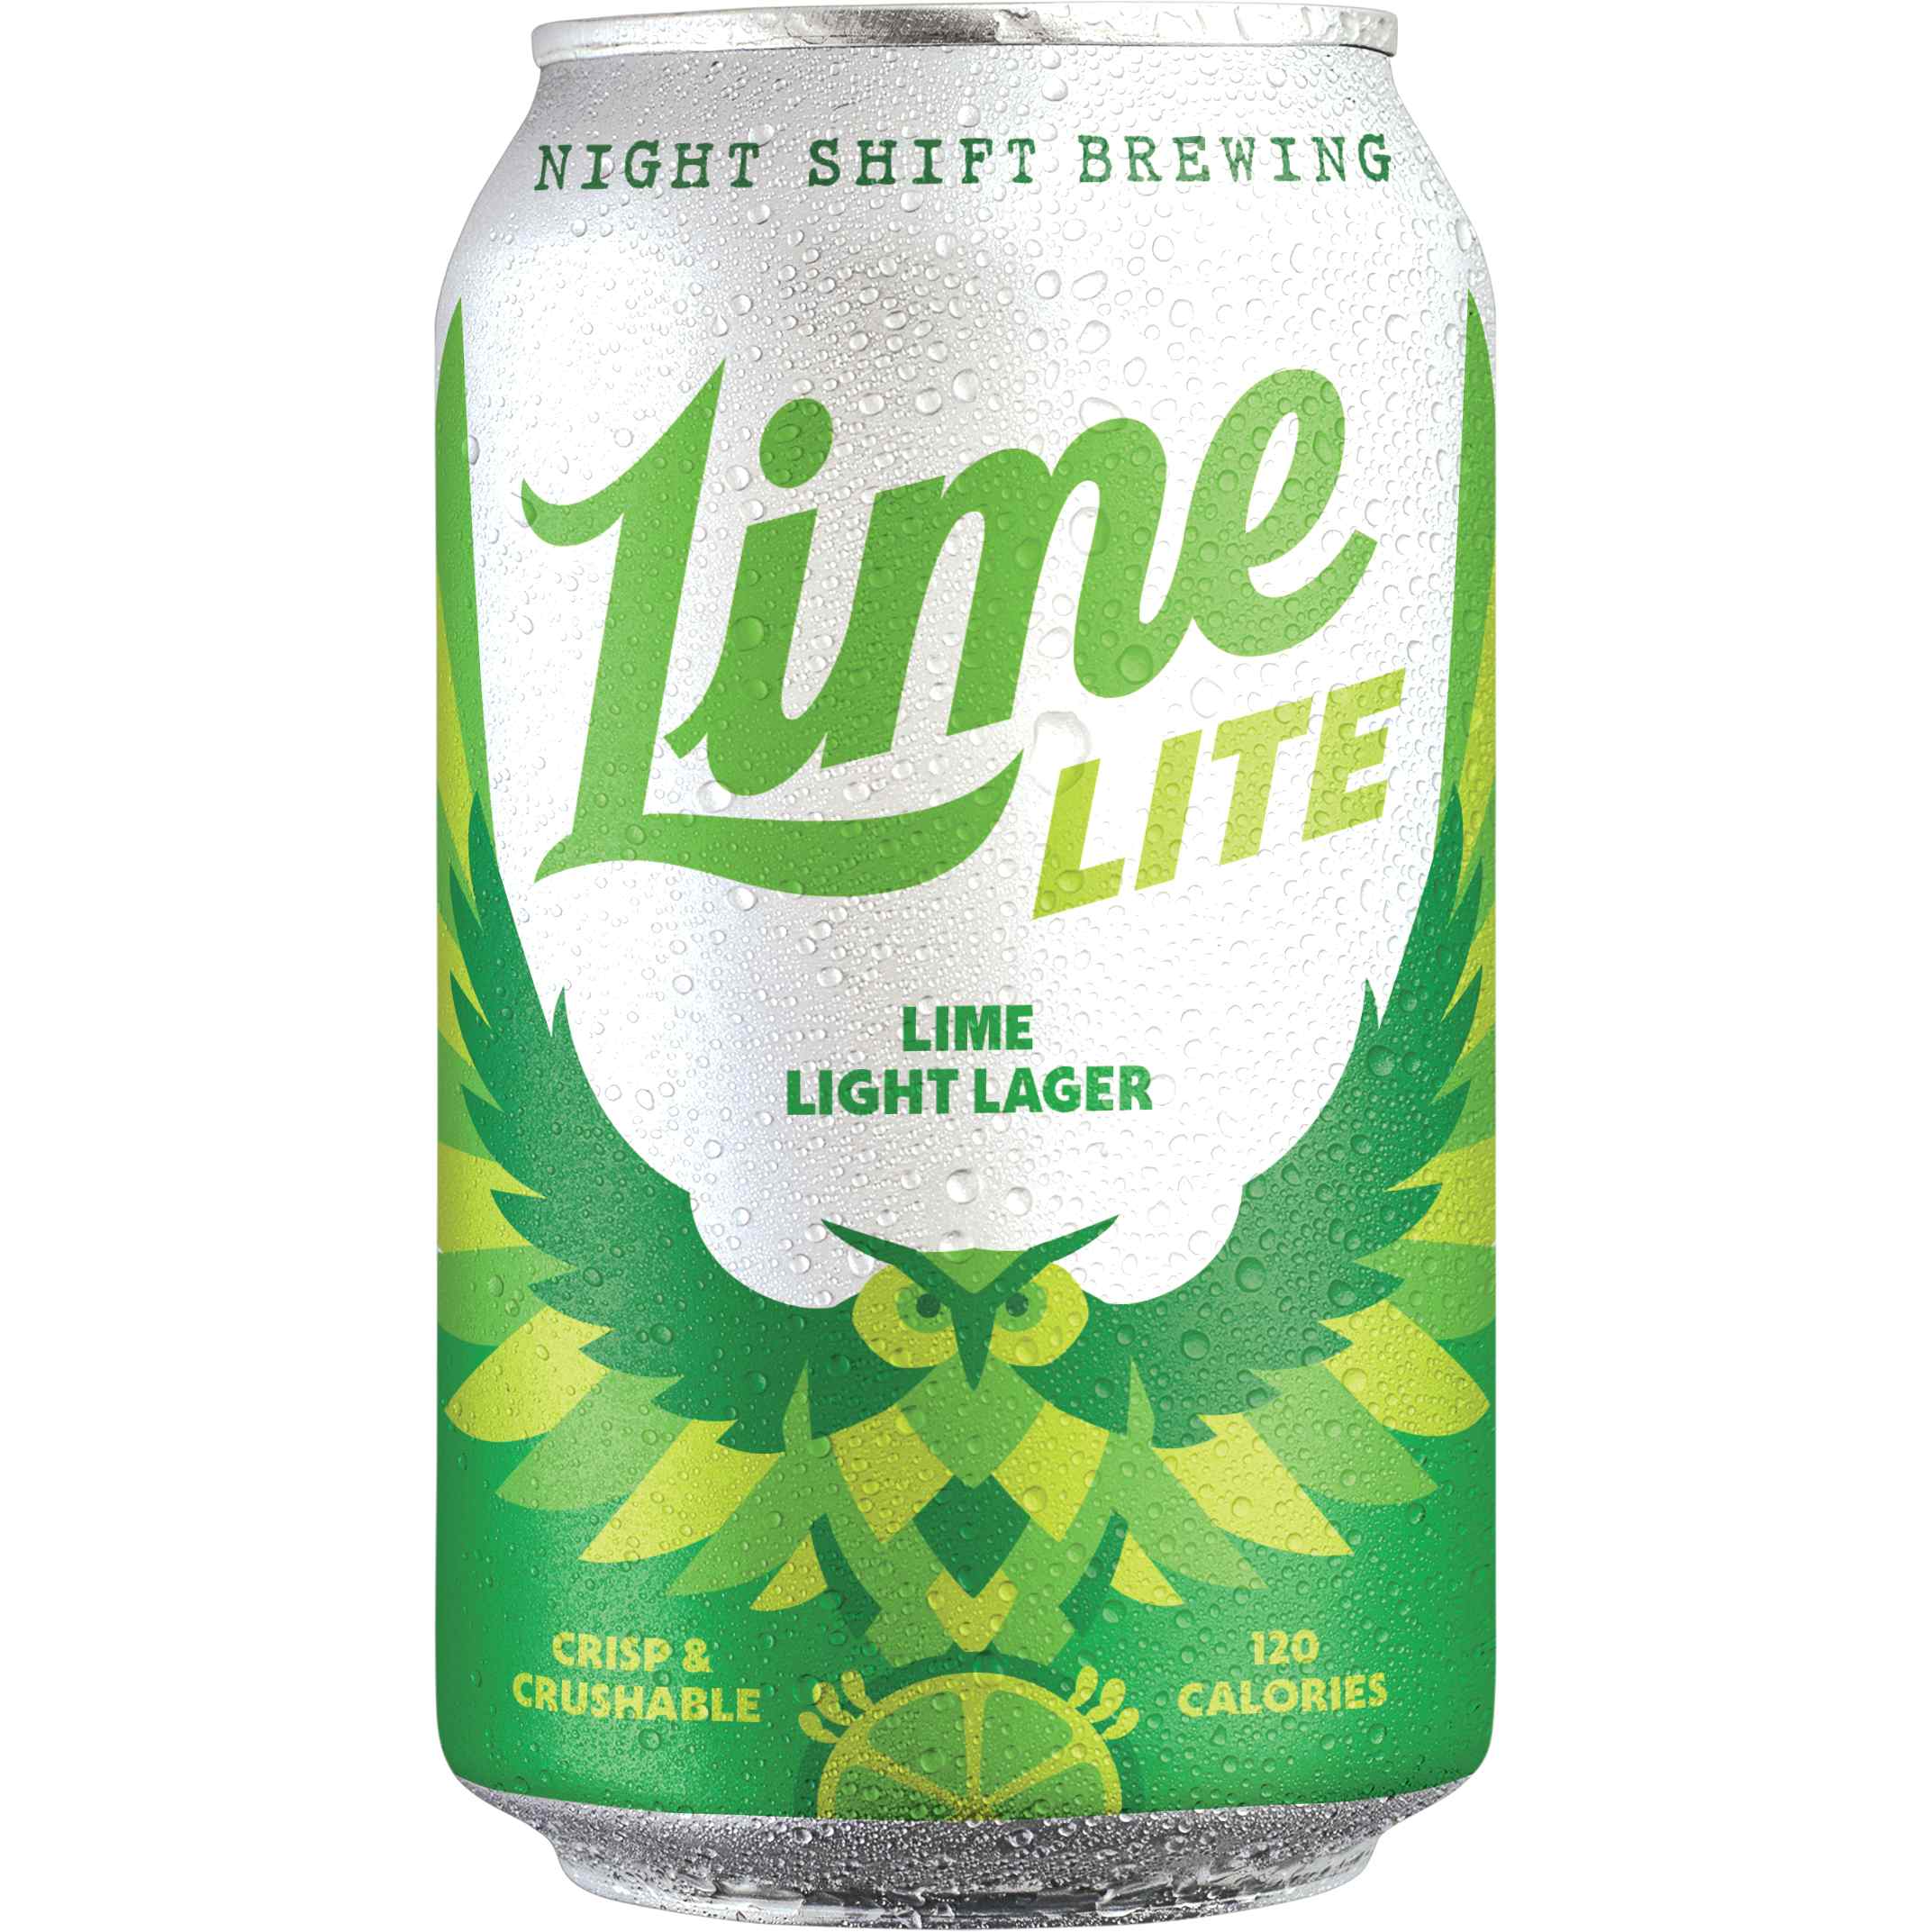 Night Shift Lime Lite Craft Light Lager with Lime